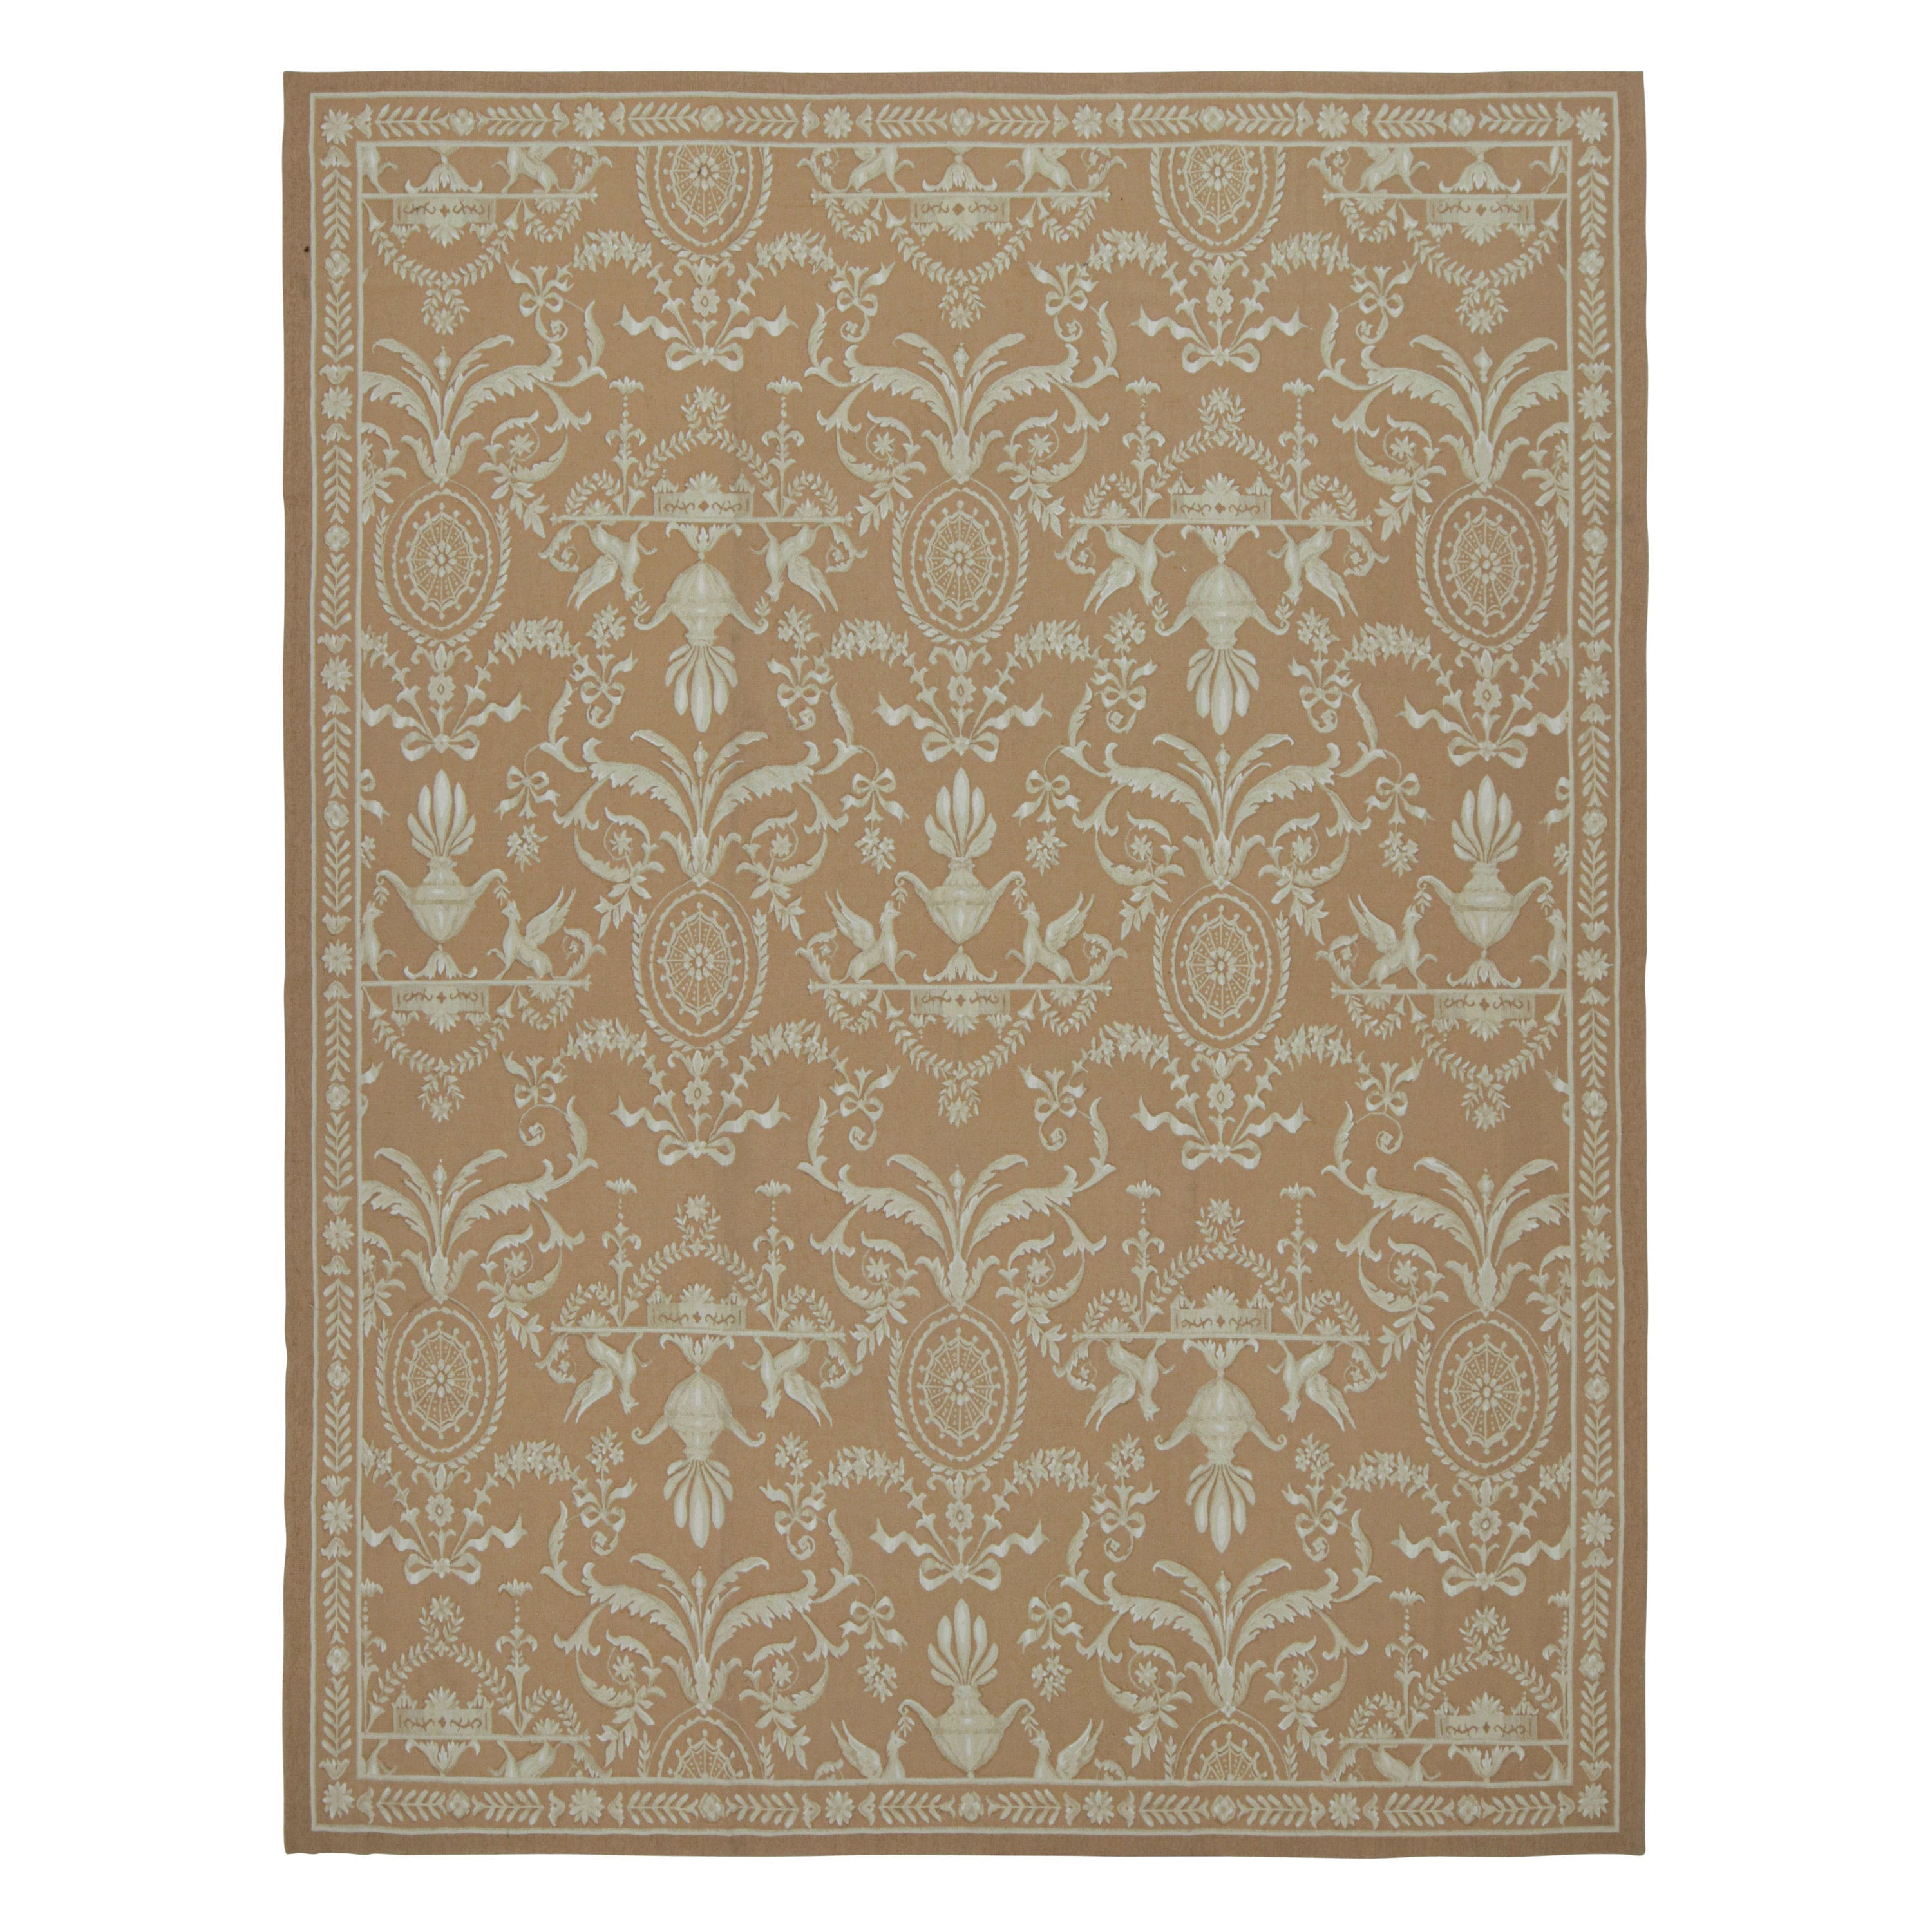 Rug & Kilim’s Aubusson Style Flatweave Rug in Brown with Beige Floral Patterns For Sale